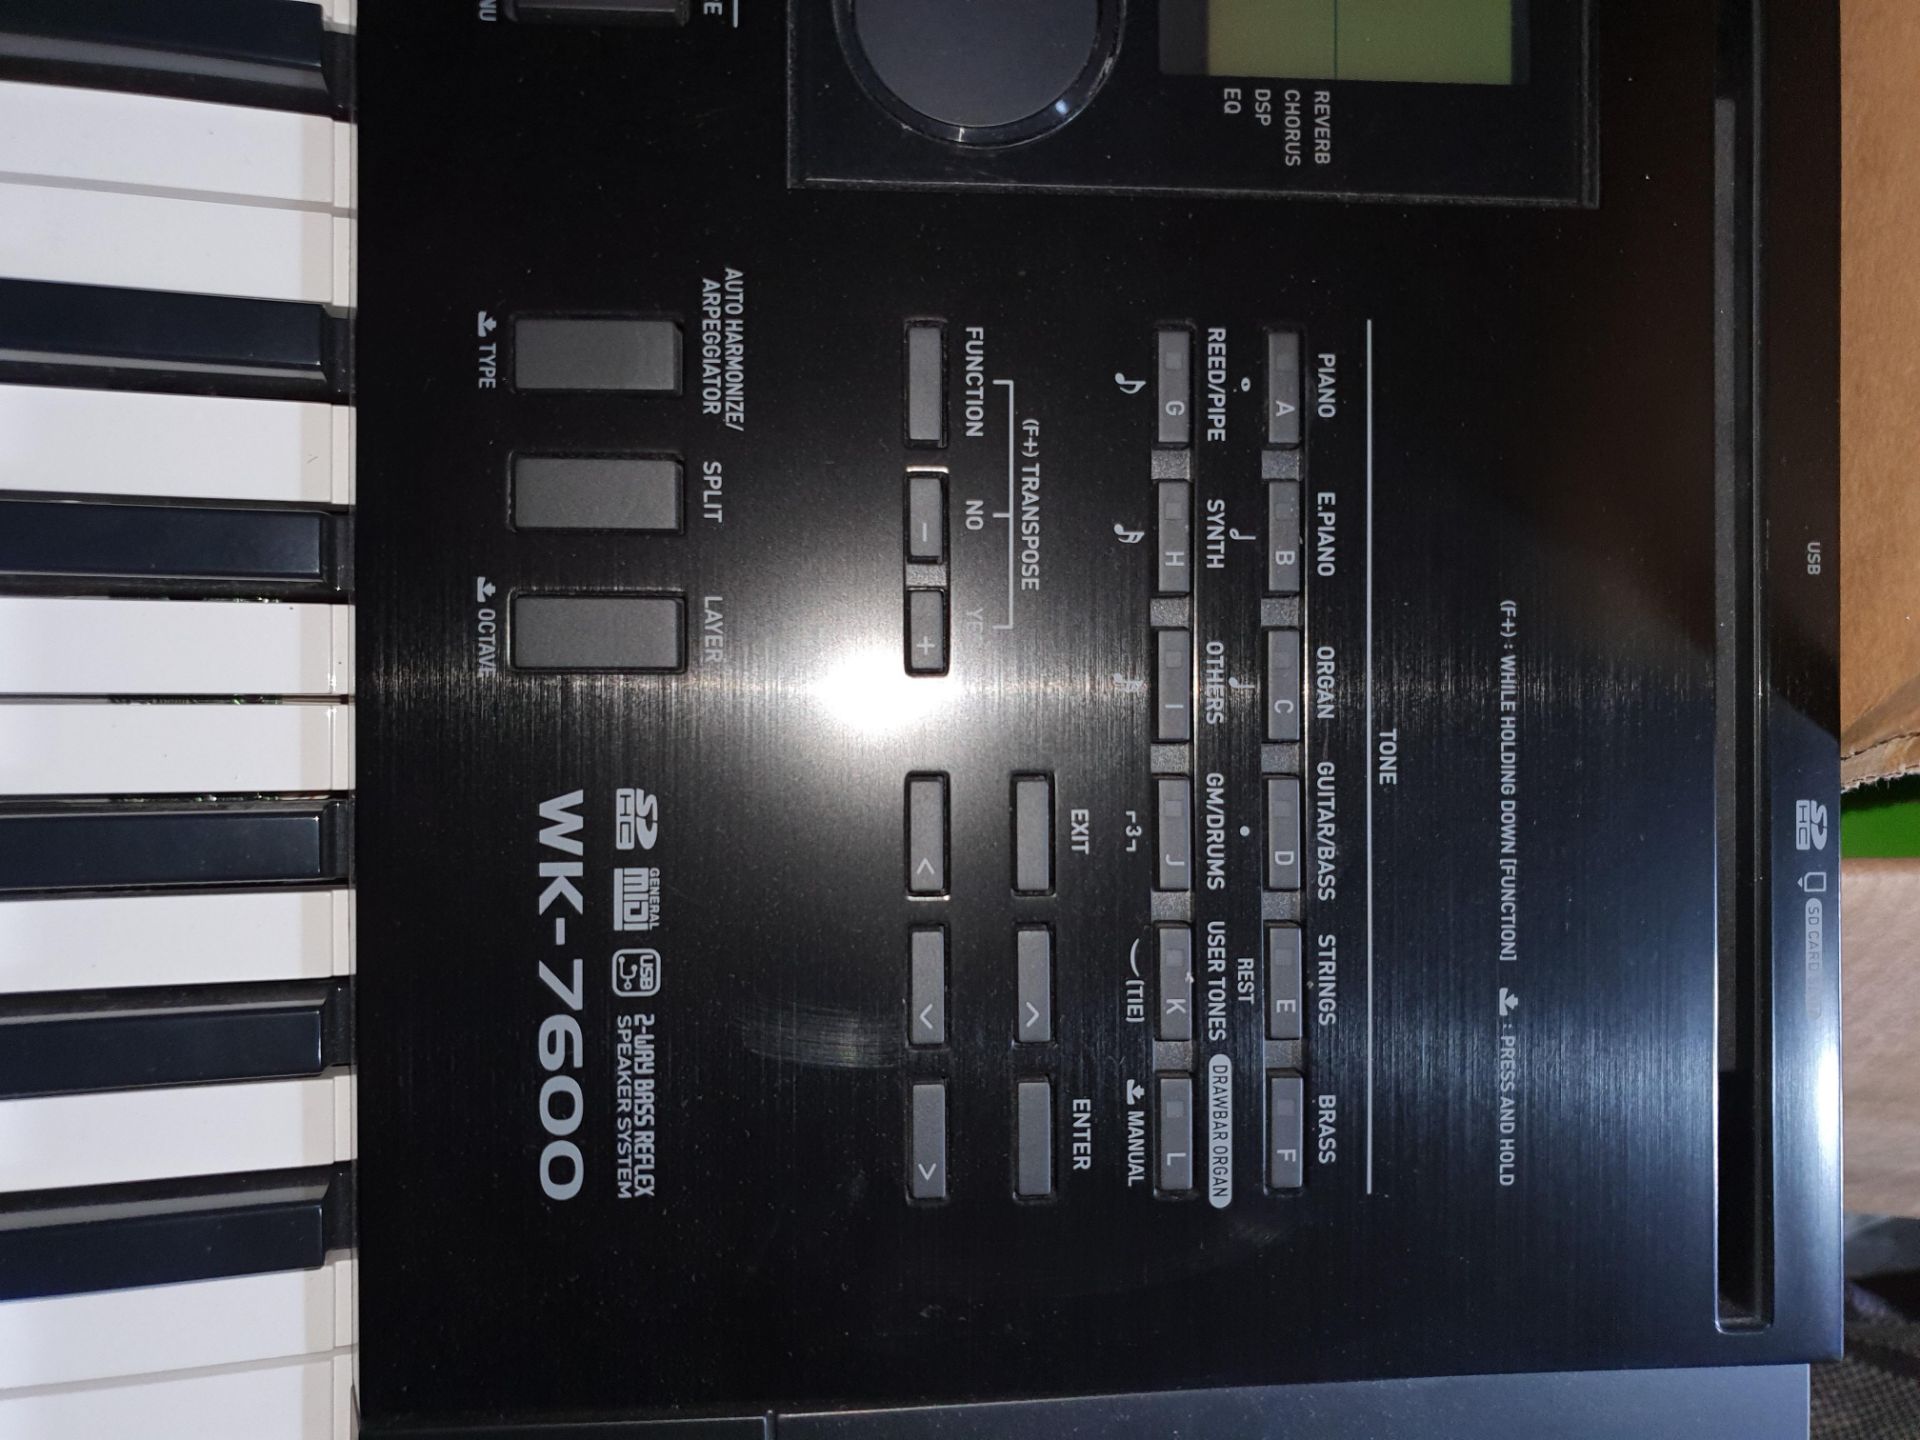 CASIO WK7600 KEYBOARD WITH POWER PLUG - Image 3 of 3